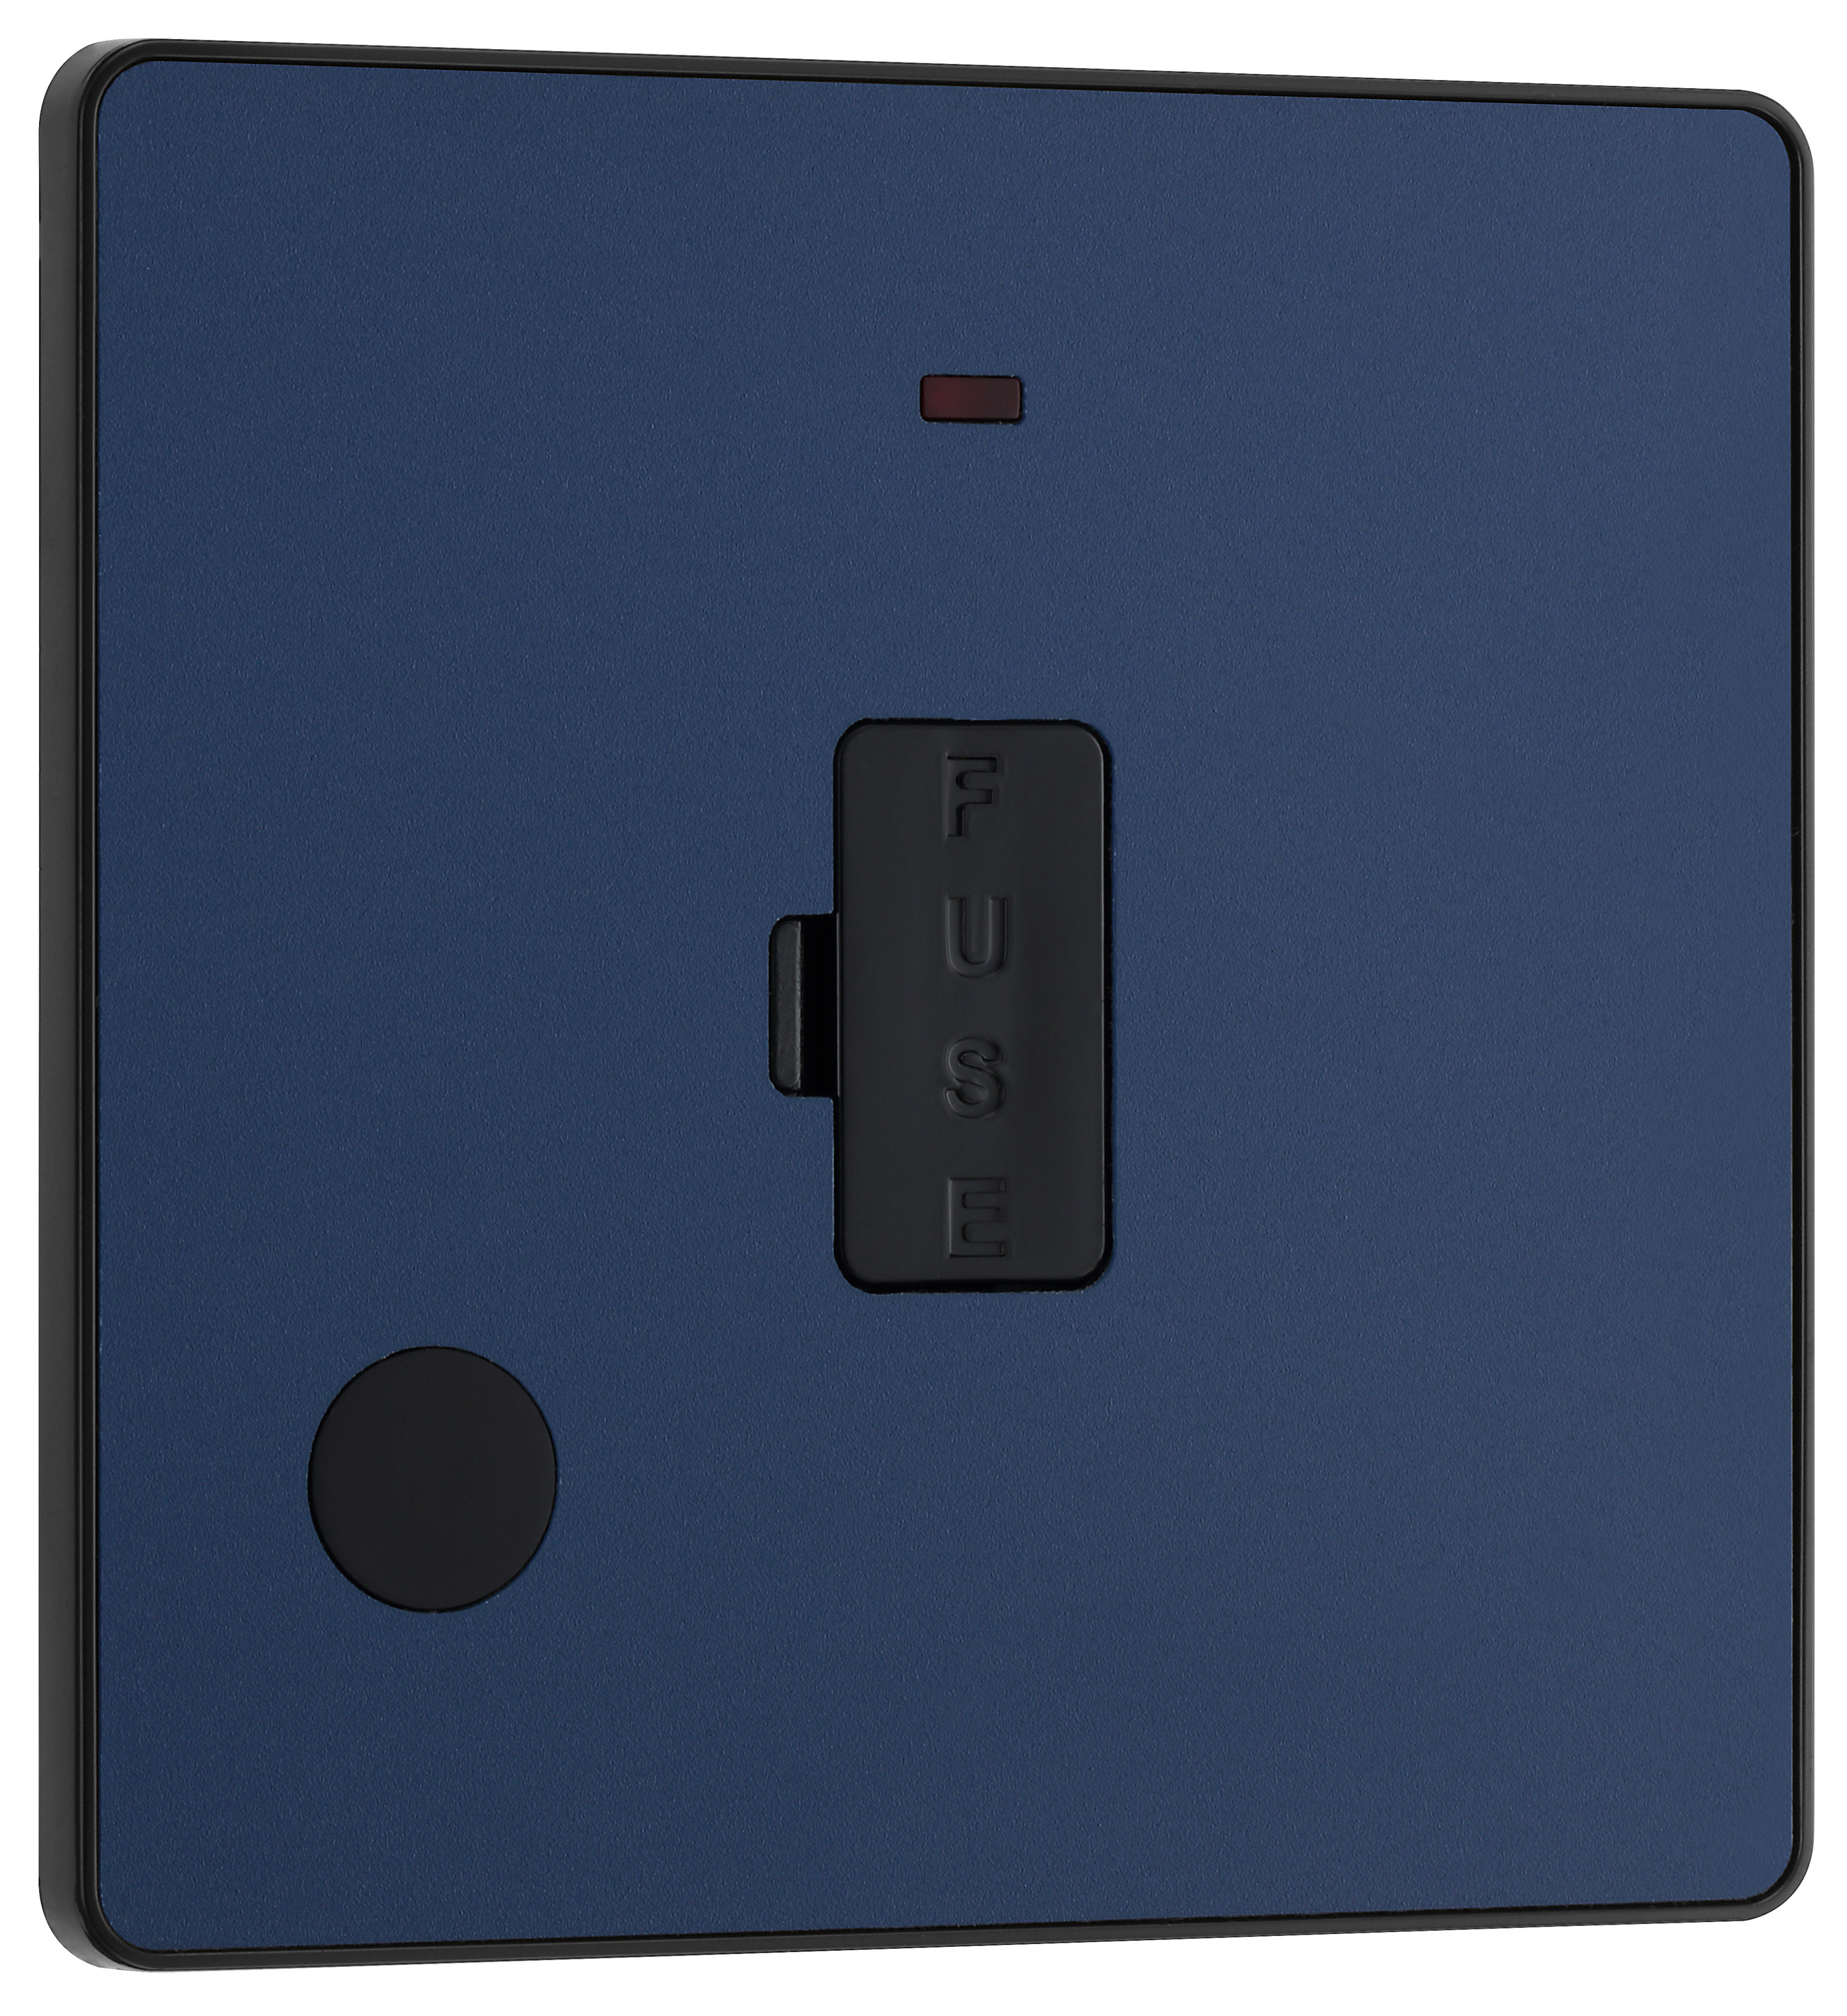 BG Evolve Matt Blue 13A Unswitched Fused Connection Unit with Power Led Indicator & Flex Outlet